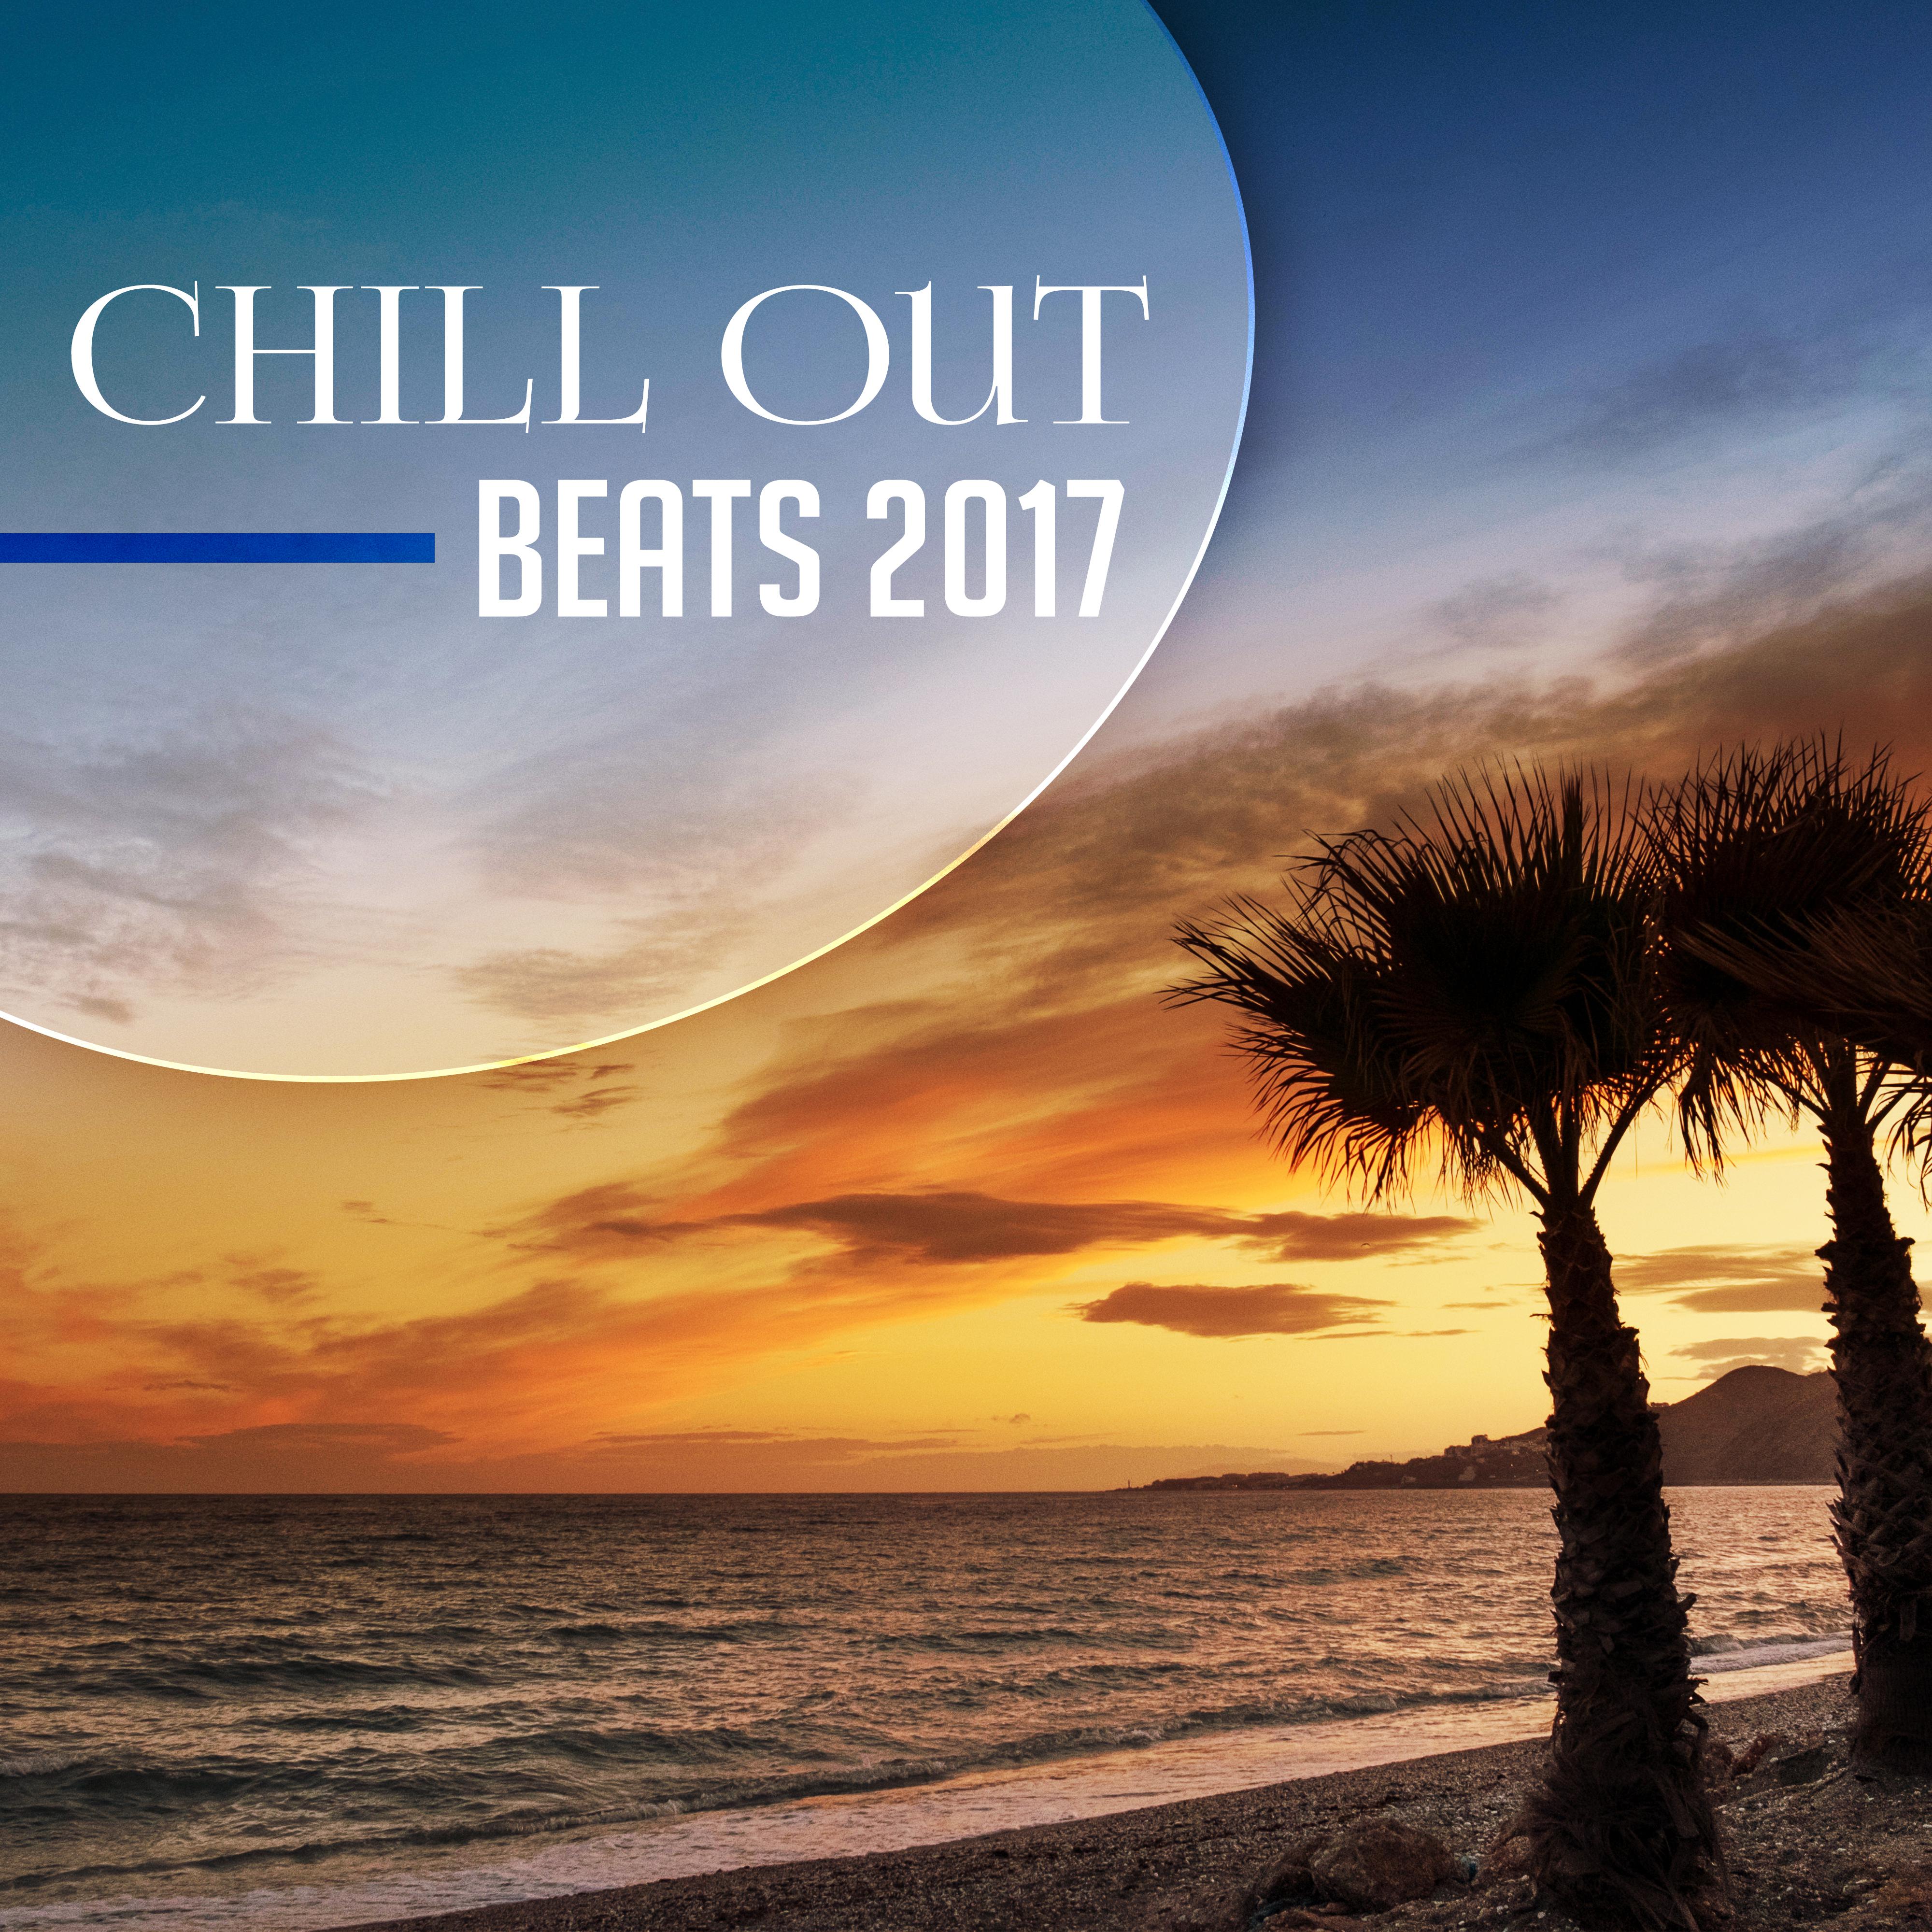 Chill Out Beats 2017 – Calm Summer Chill, Stress Relief, Chilled Waves, Holiday Music